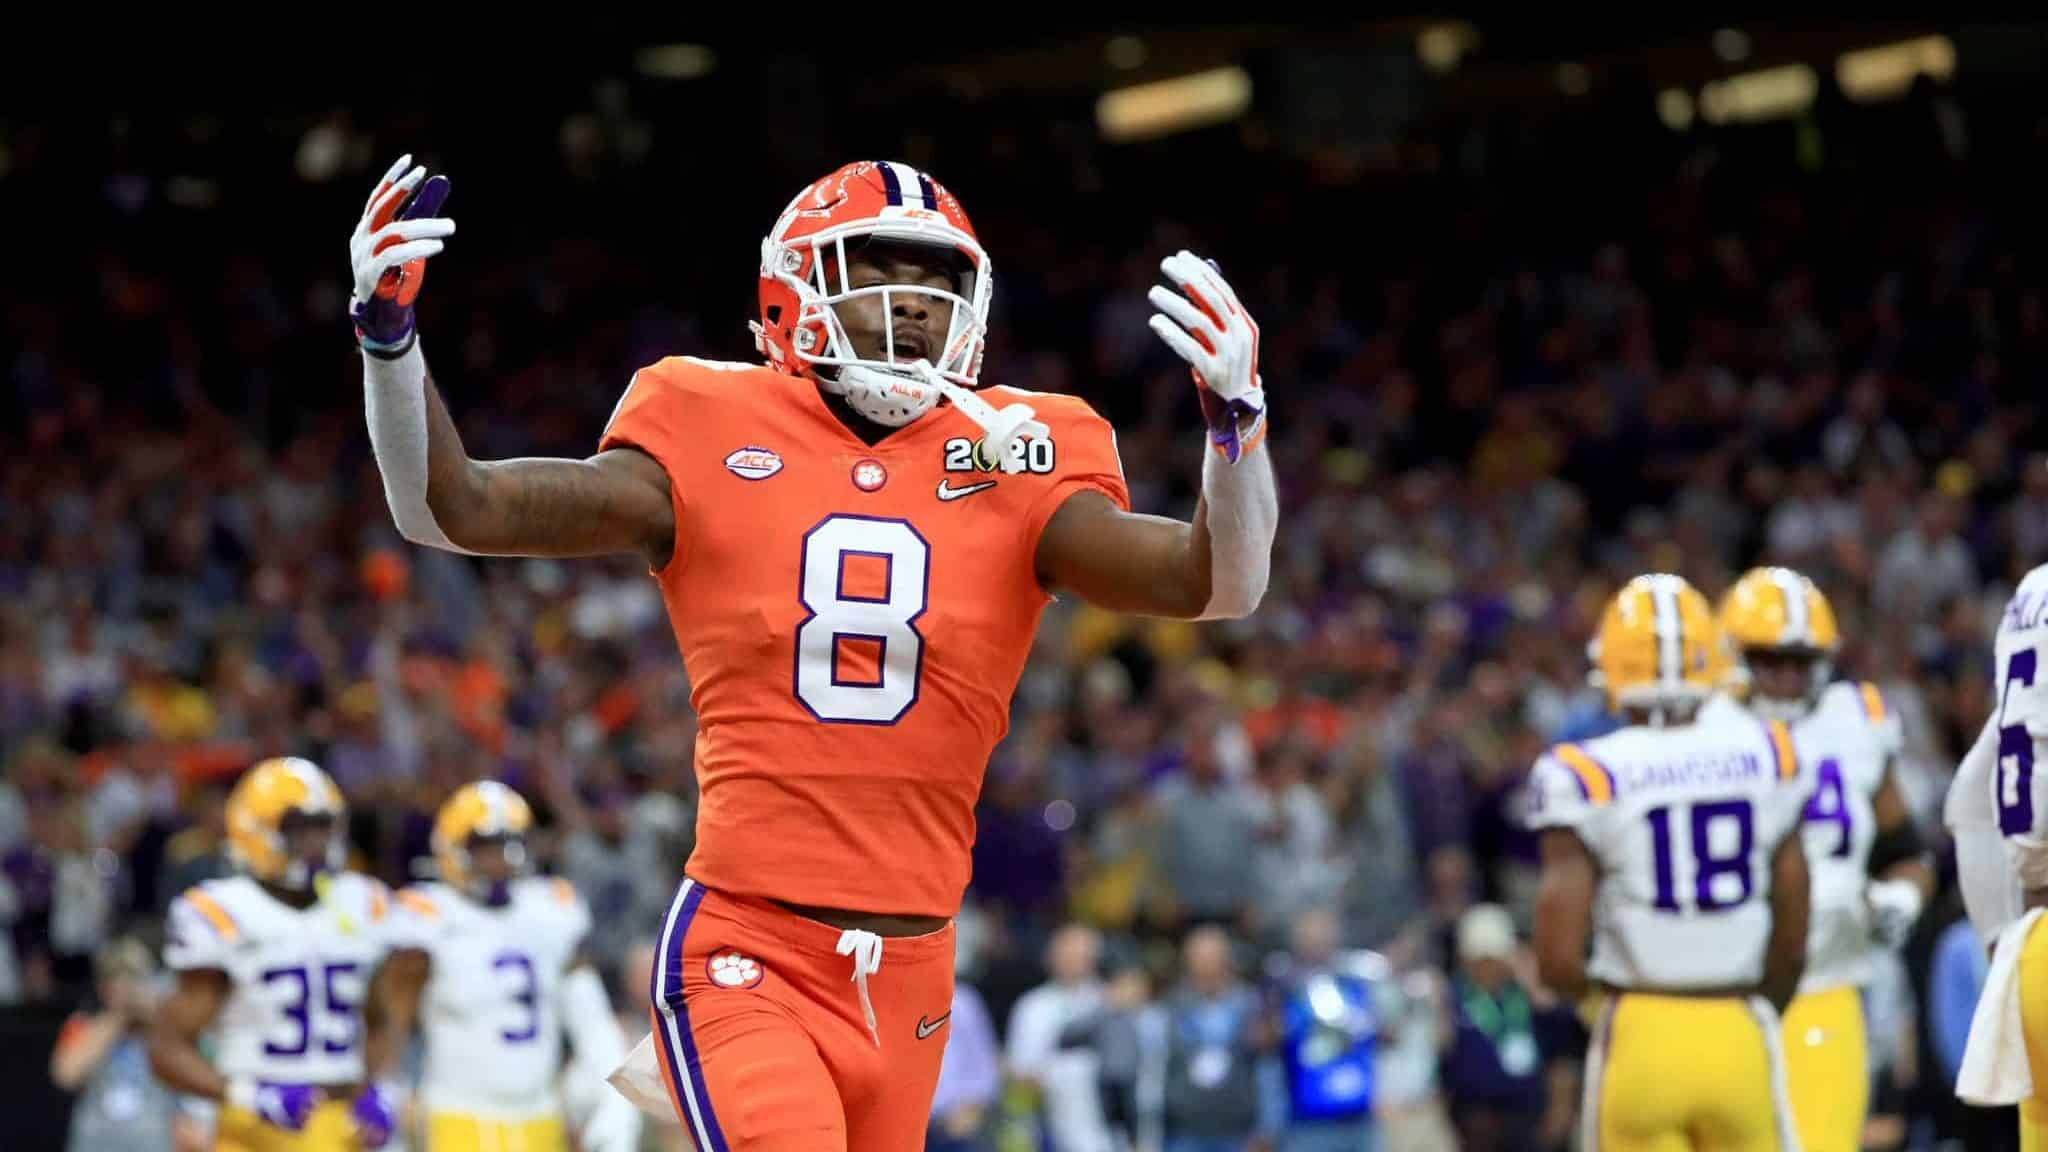 NEW ORLEANS, LOUISIANA - JANUARY 13: A.J. Terrell #8 of the Clemson Tigers celebrates against the LSU Tigers in the College Football Playoff National Championship game at Mercedes Benz Superdome on January 13, 2020 in New Orleans, Louisiana.